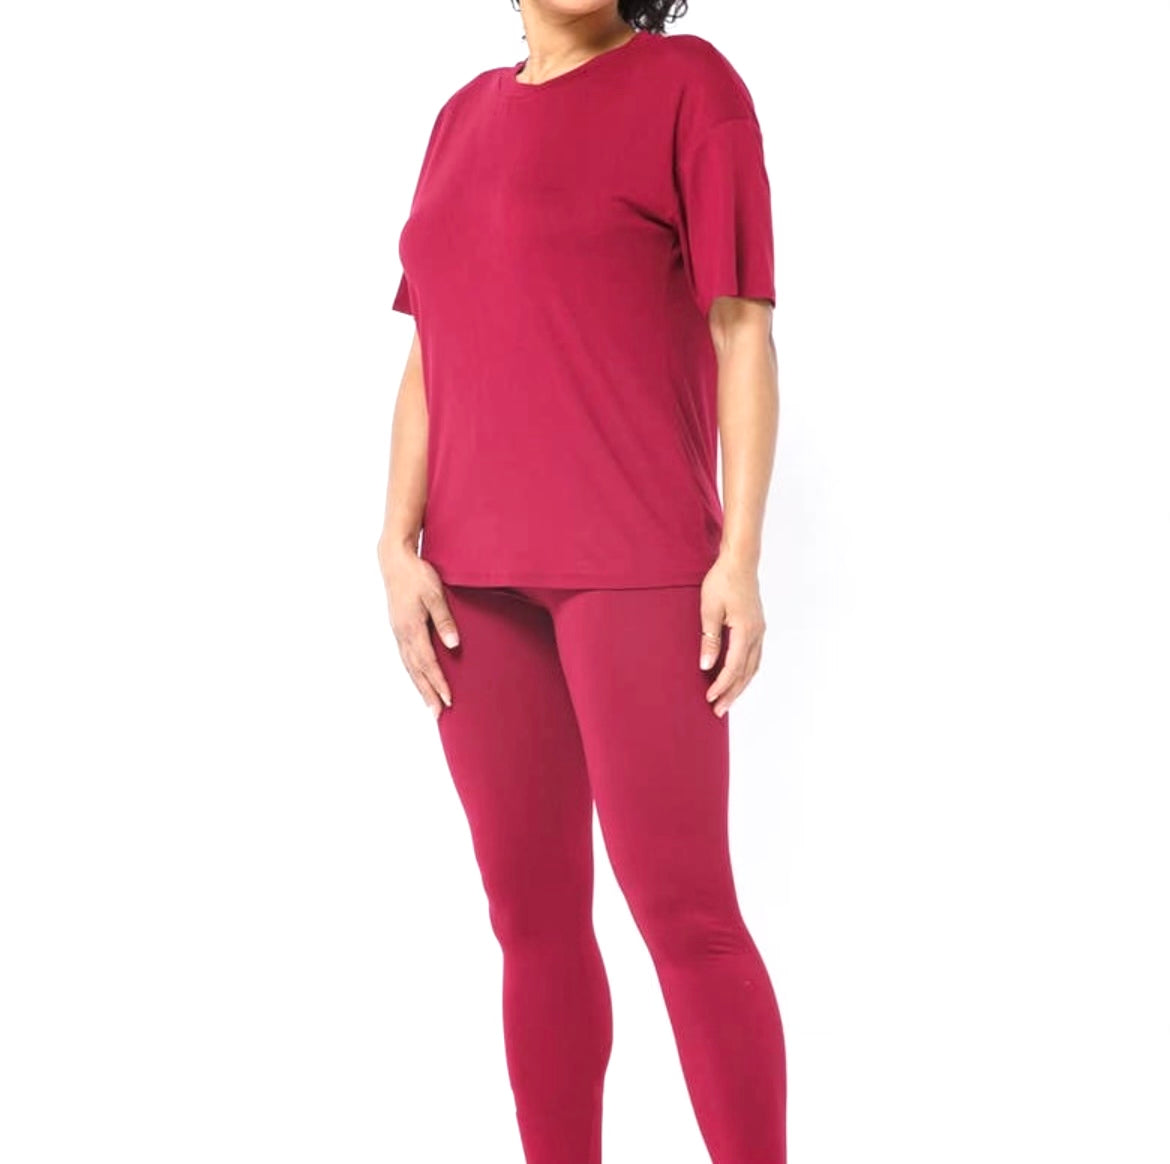 Plus Size Legging Sets| Plus Size Two Piece Outfits Regular Tee and Leggings Matching Set